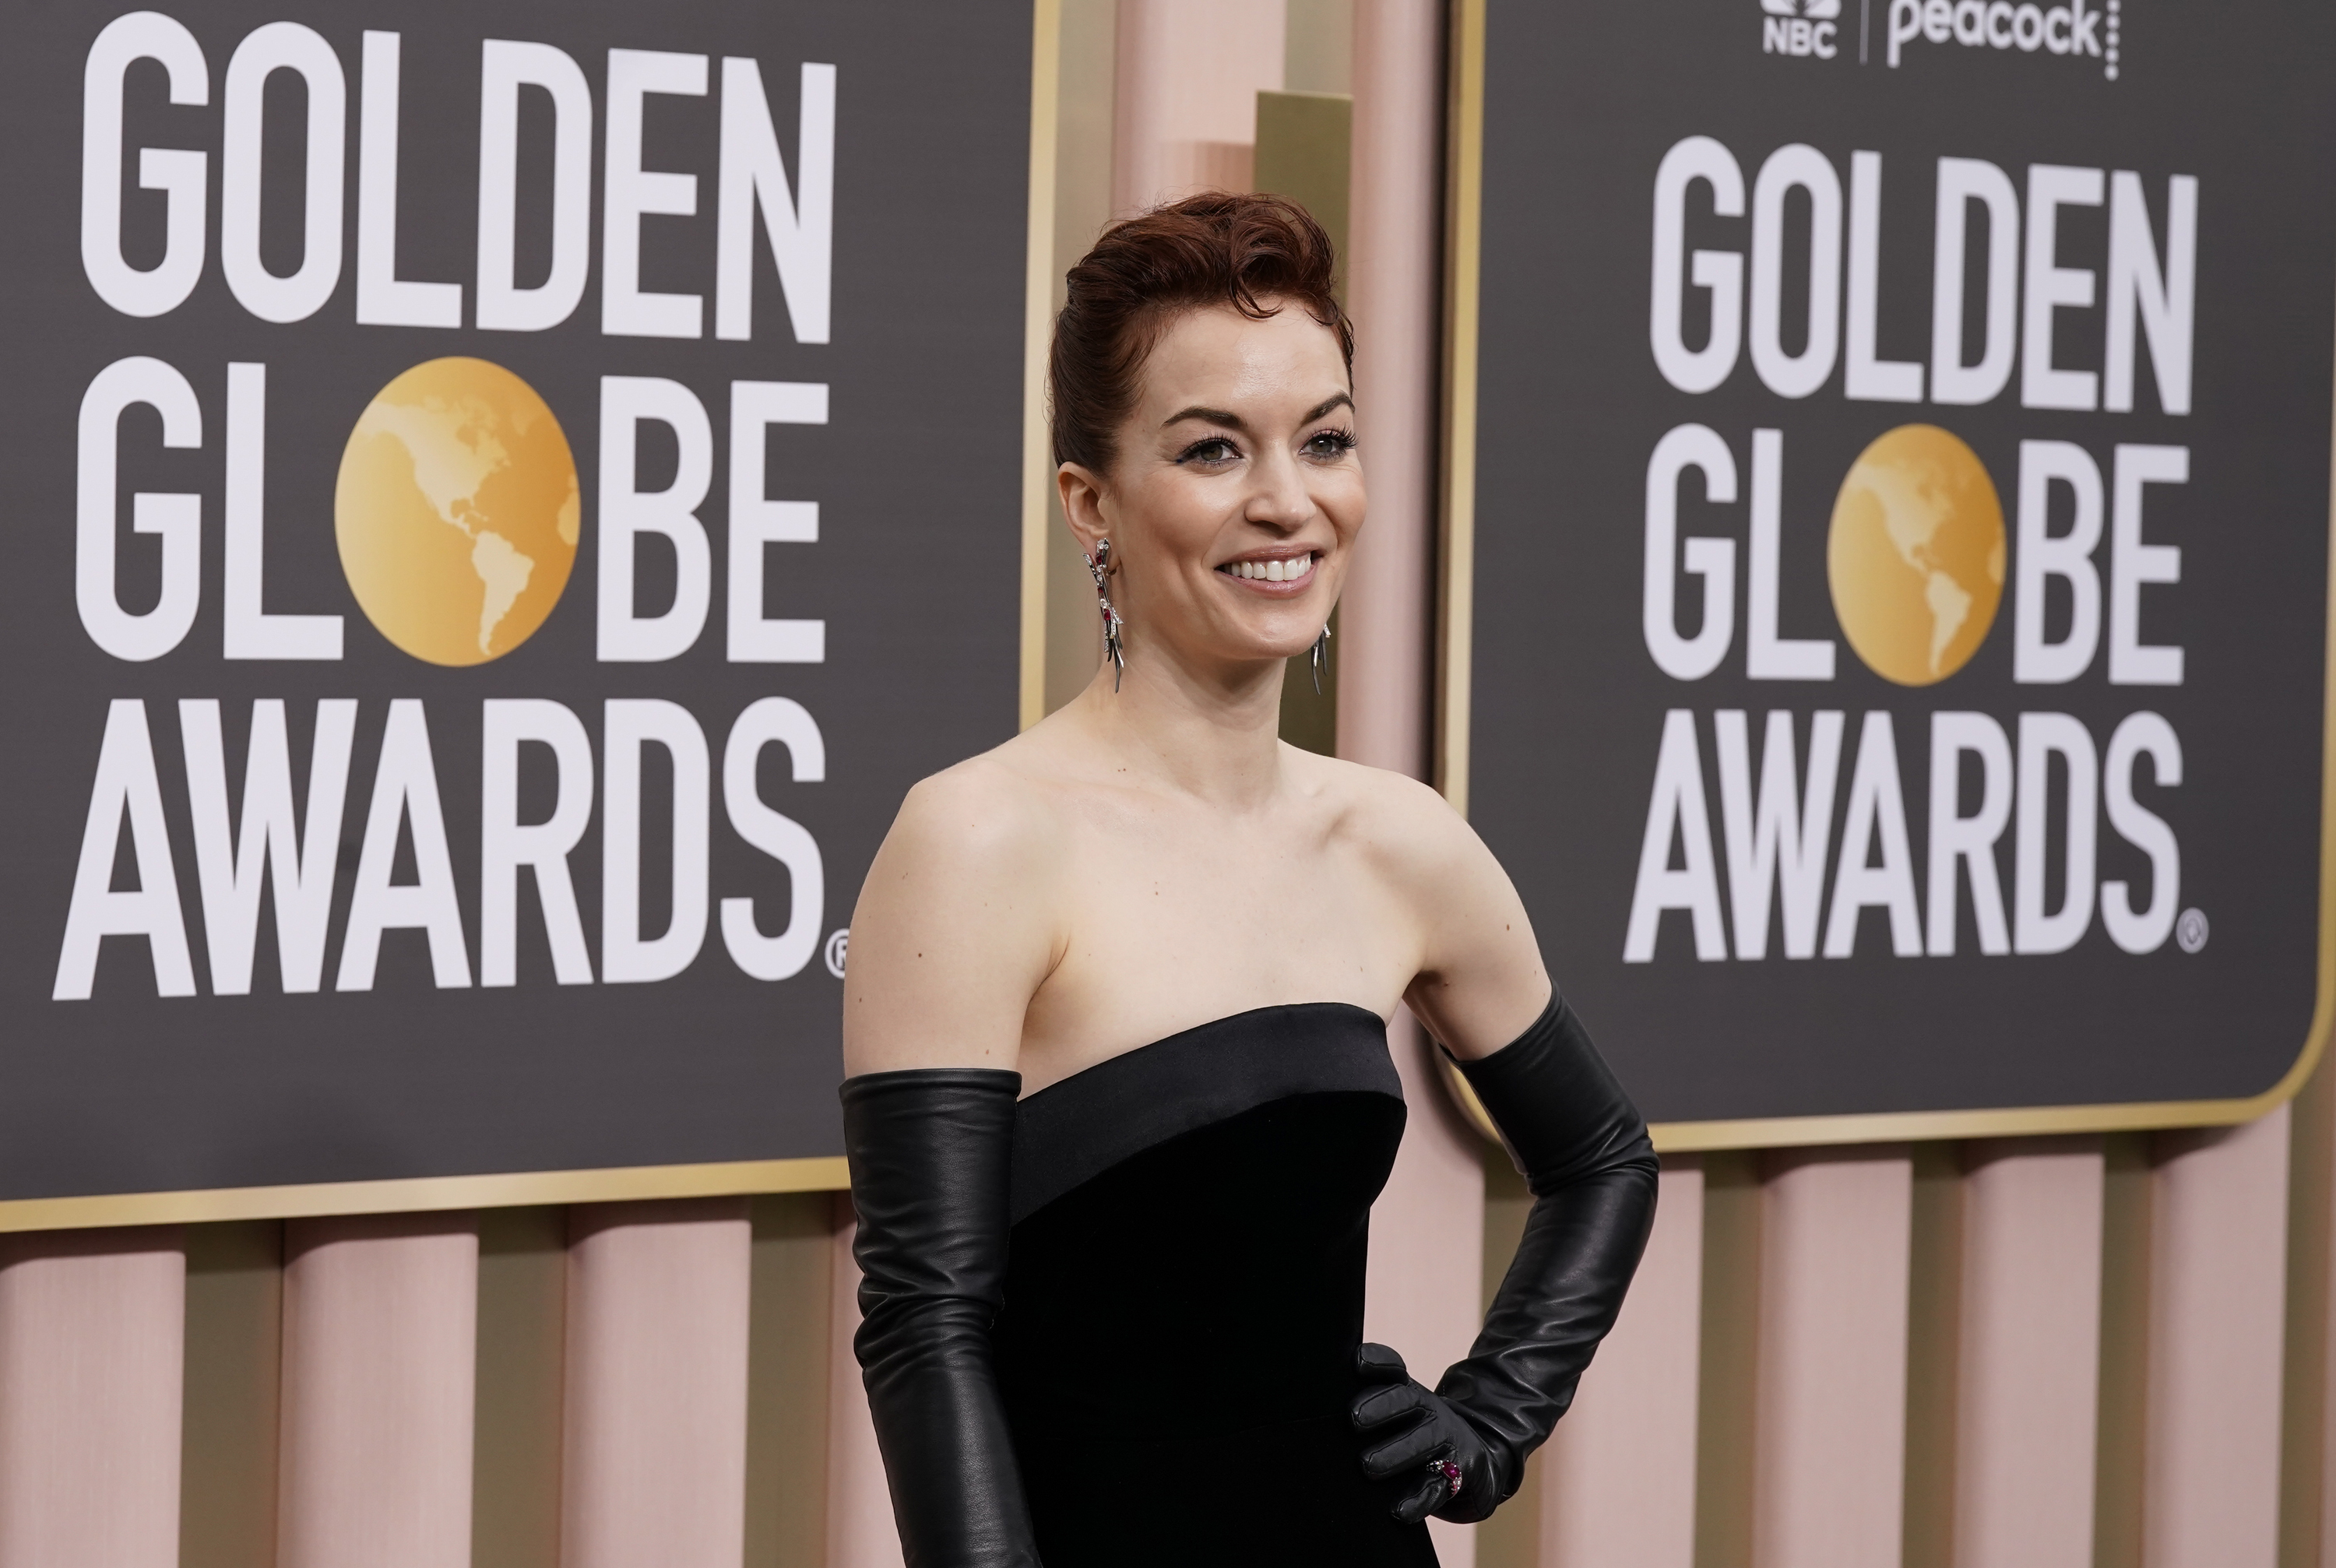 Britt Lower arrives at the 80th annual Golden Globe Awards at the Beverly Hilton Hotel on Tuesday, Jan. 10, 2023, in Beverly Hills, Calif. (Photo by Jordan Strauss/Invision/AP)